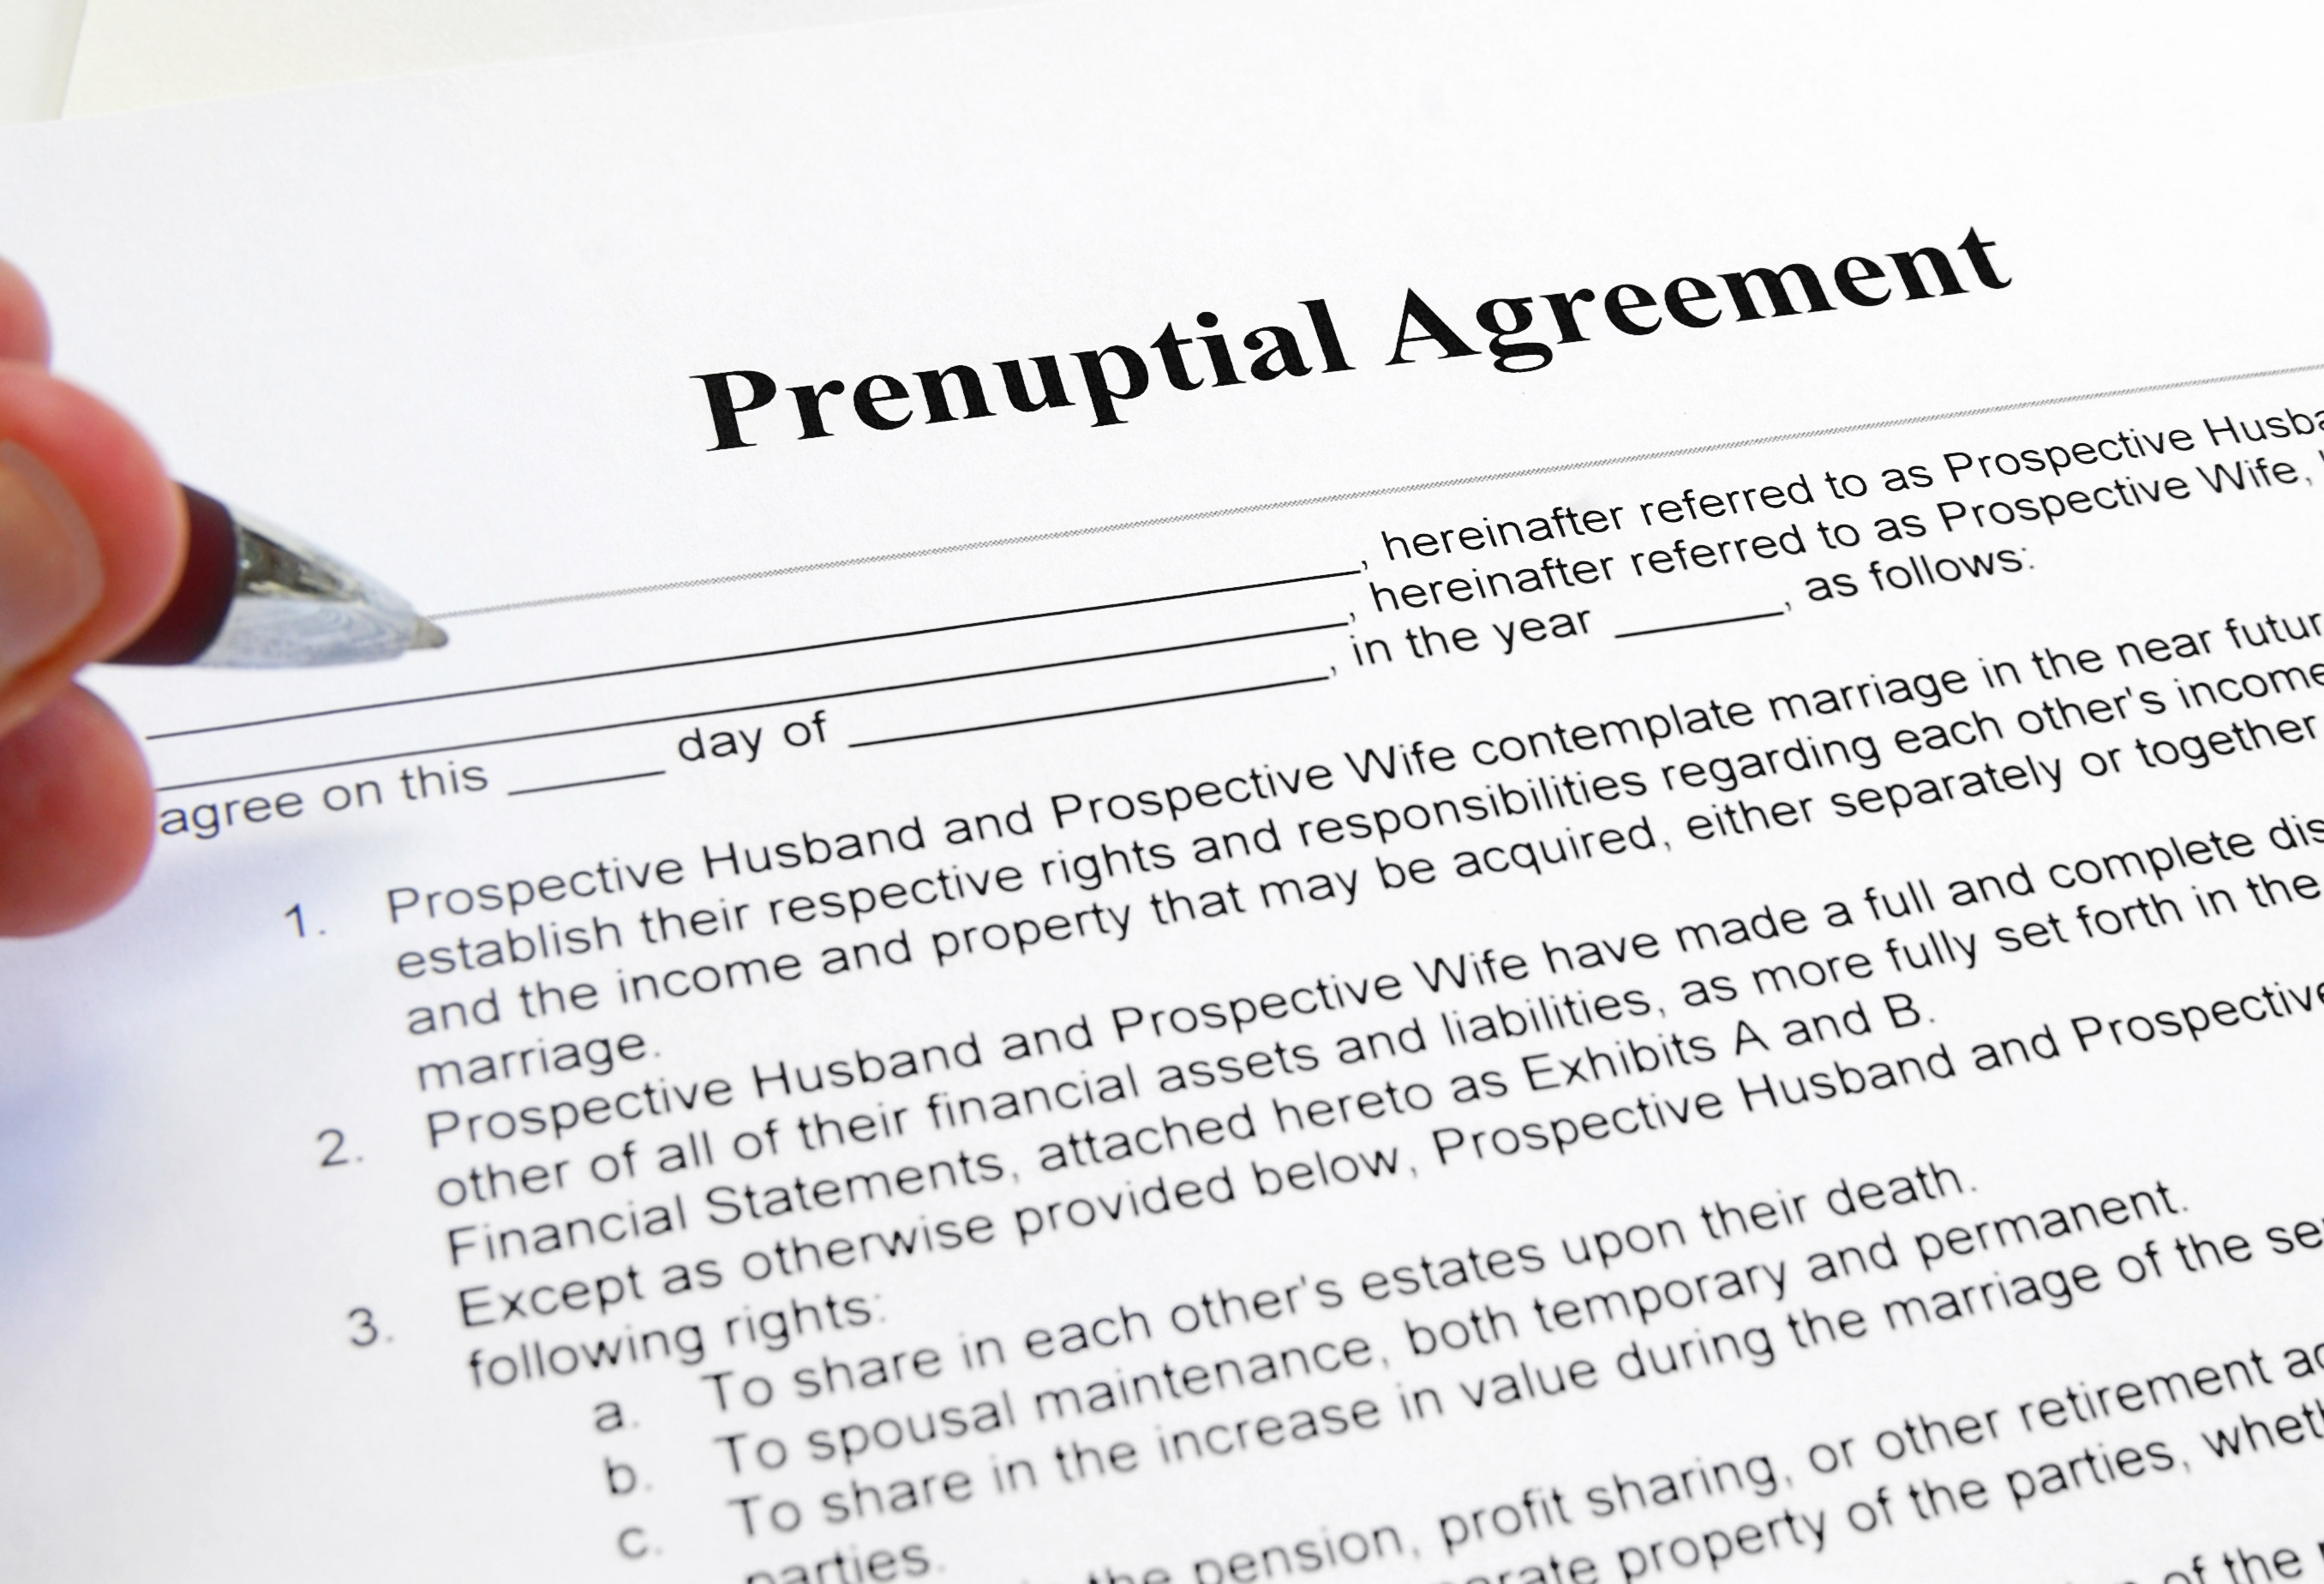 signing a prenuptial marriage contract